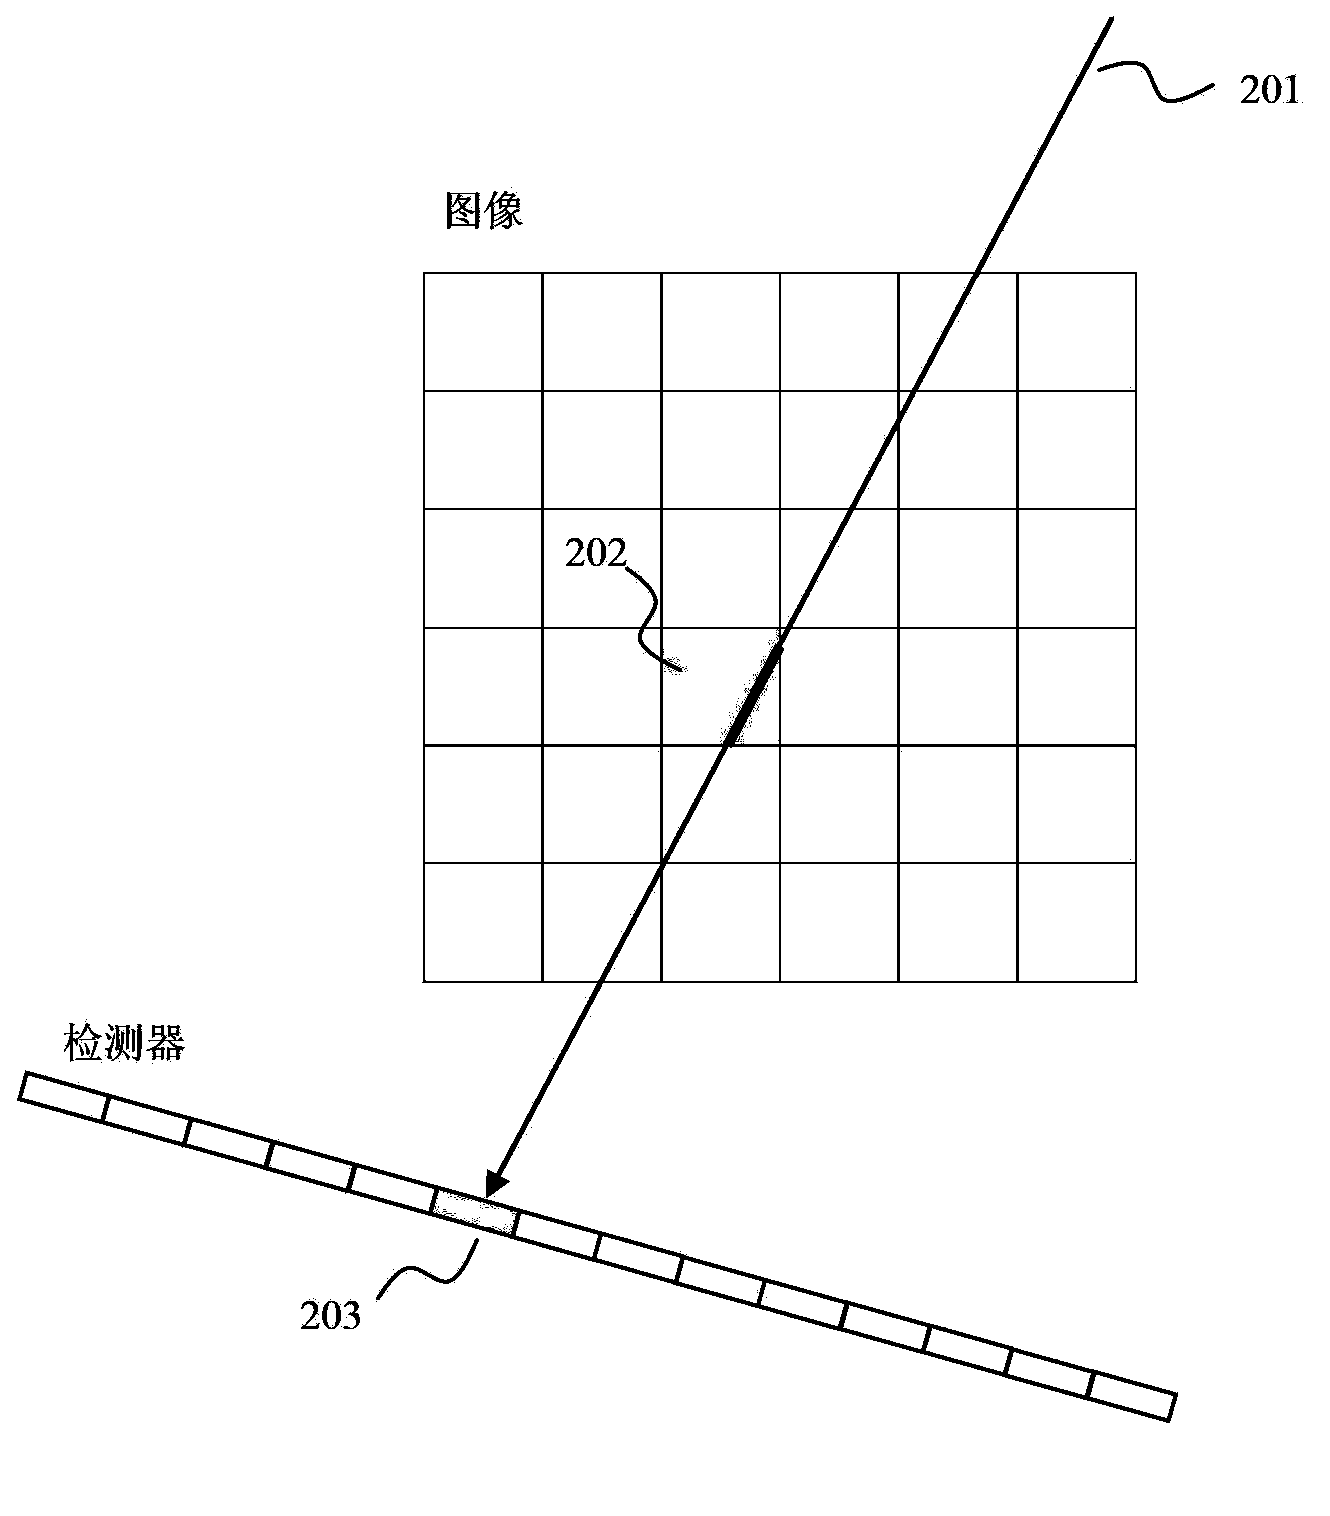 CT (computed tomography) image generation device and CT image generation method